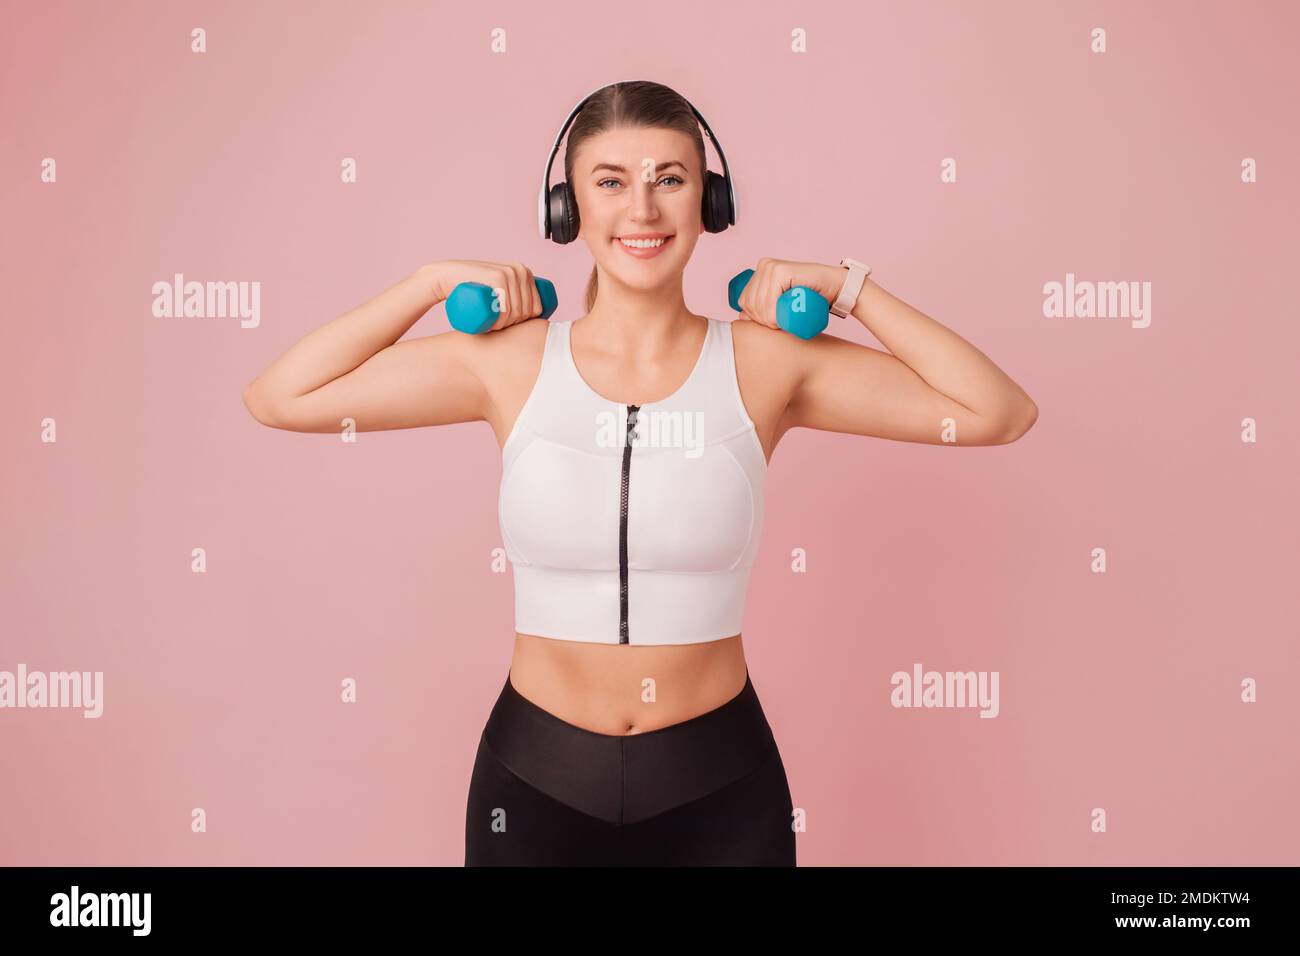 Happy smiling caucasian fitness woman lifting blue dumbbells. Attractive young woman wearing sportswear doing sport exercises over pink background Stock Photo